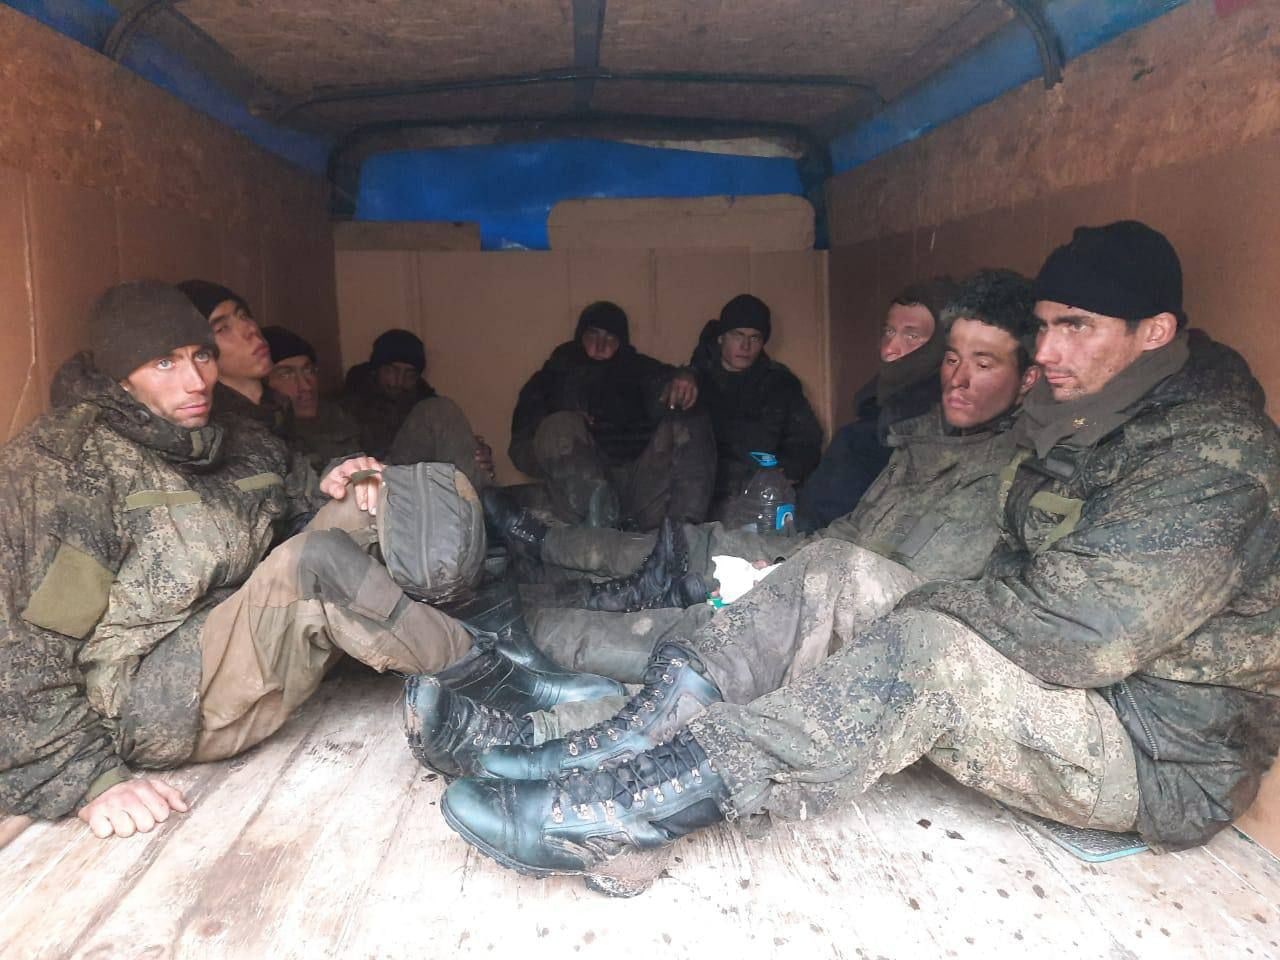 Russia’s prisoners of war captured on the outskirts of Sumy, Ukraine, Defense Express